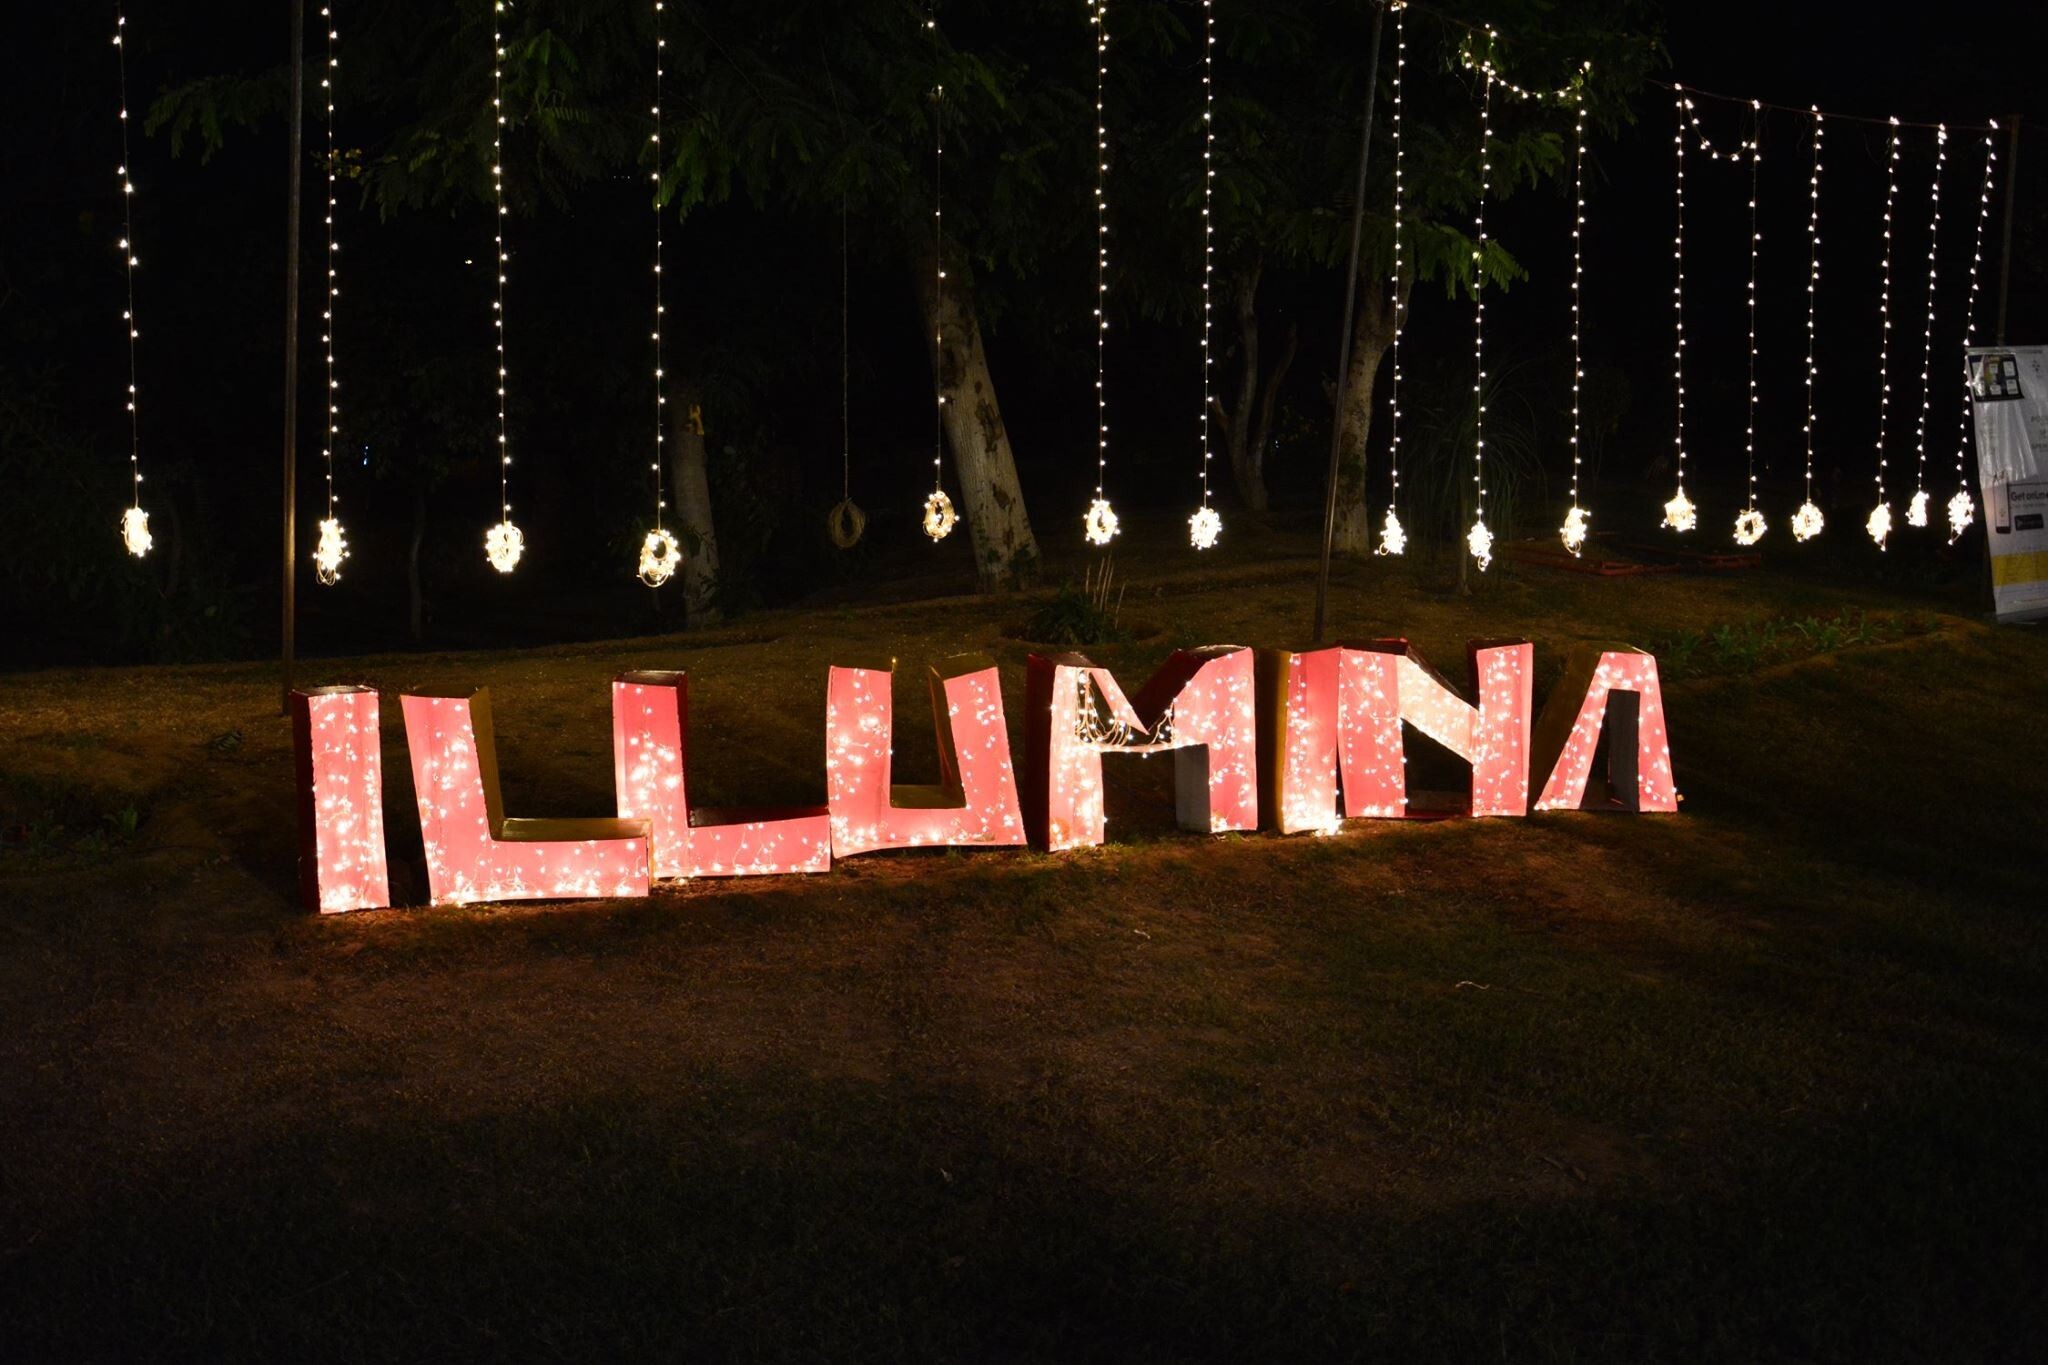 Illumina fest's cut-out being displayed with lights at night in MDI